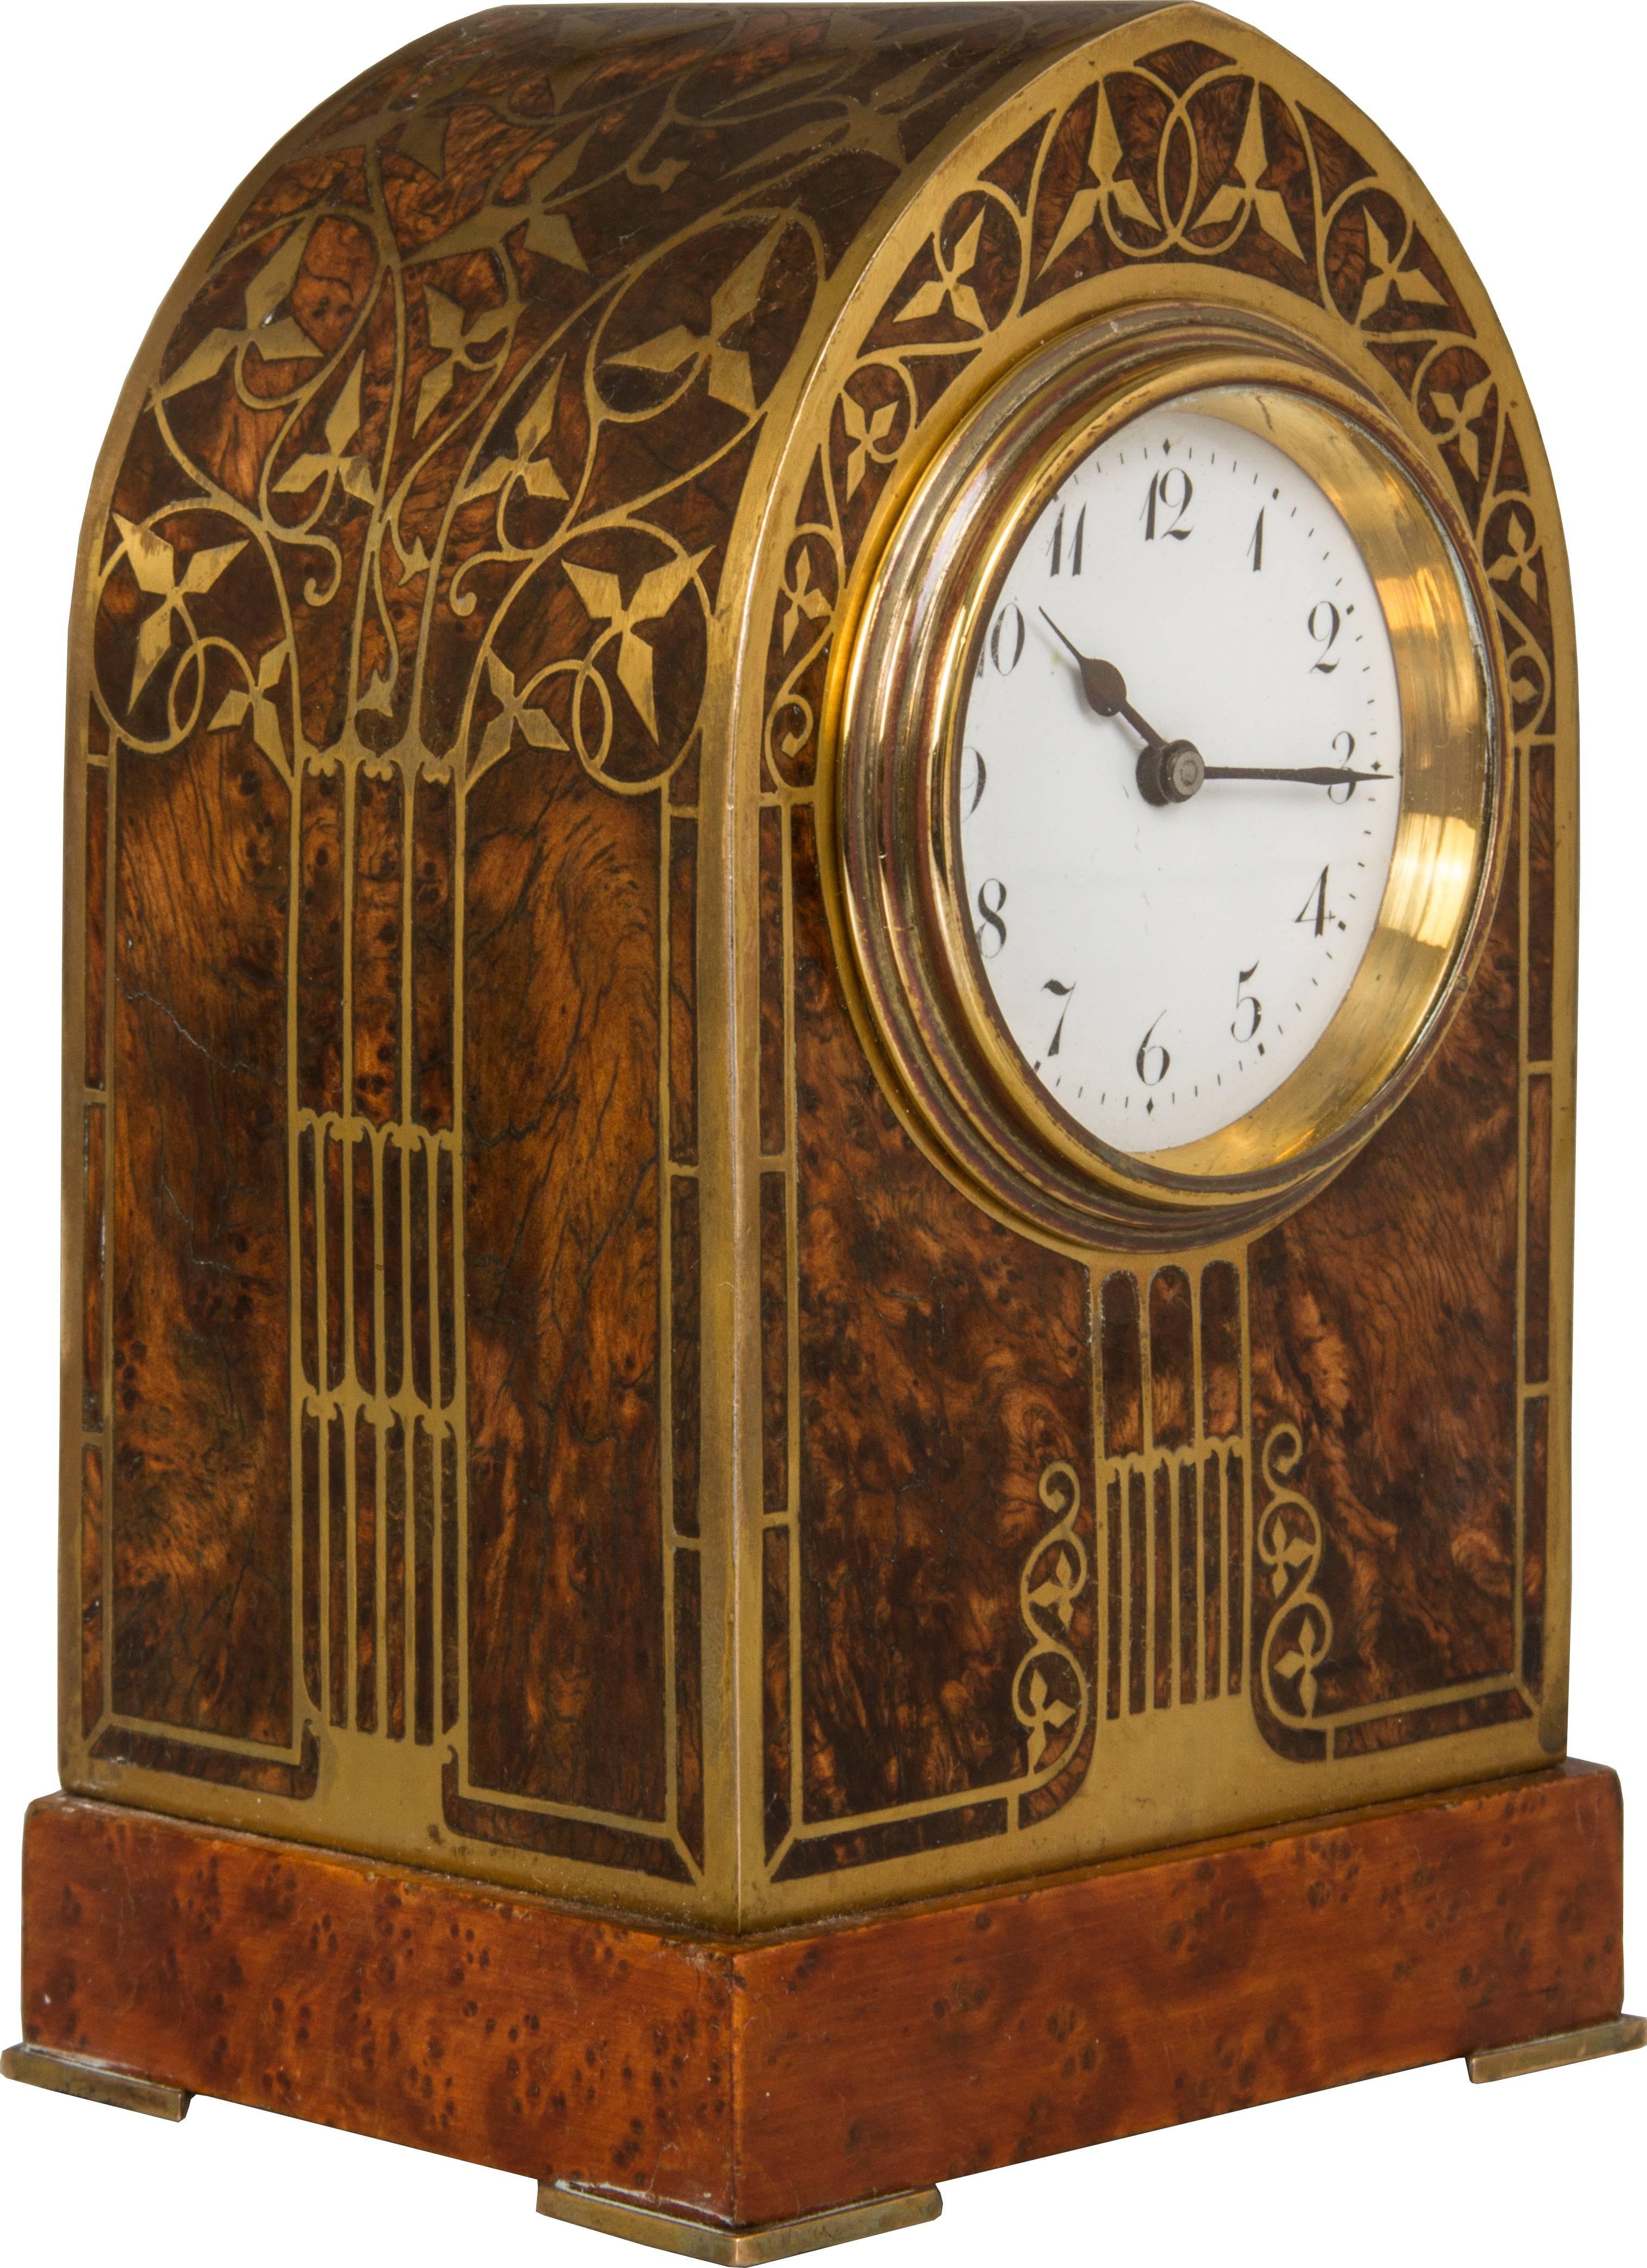 This is a beautiful clock, with inlaid exotic woods and brass.